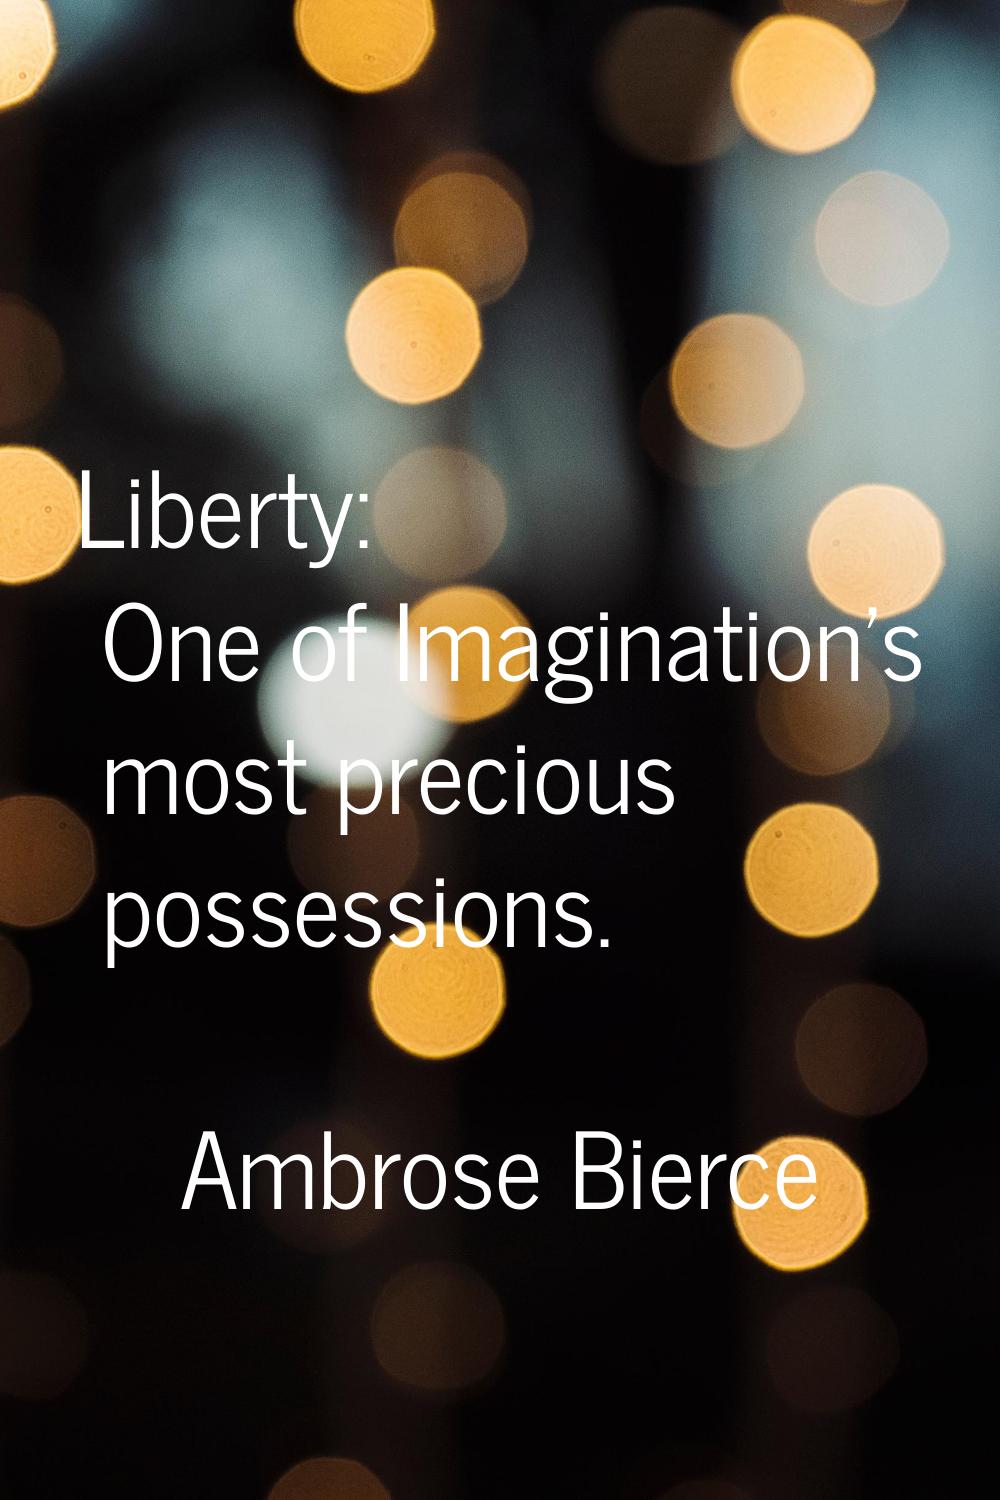 Liberty: One of Imagination's most precious possessions.